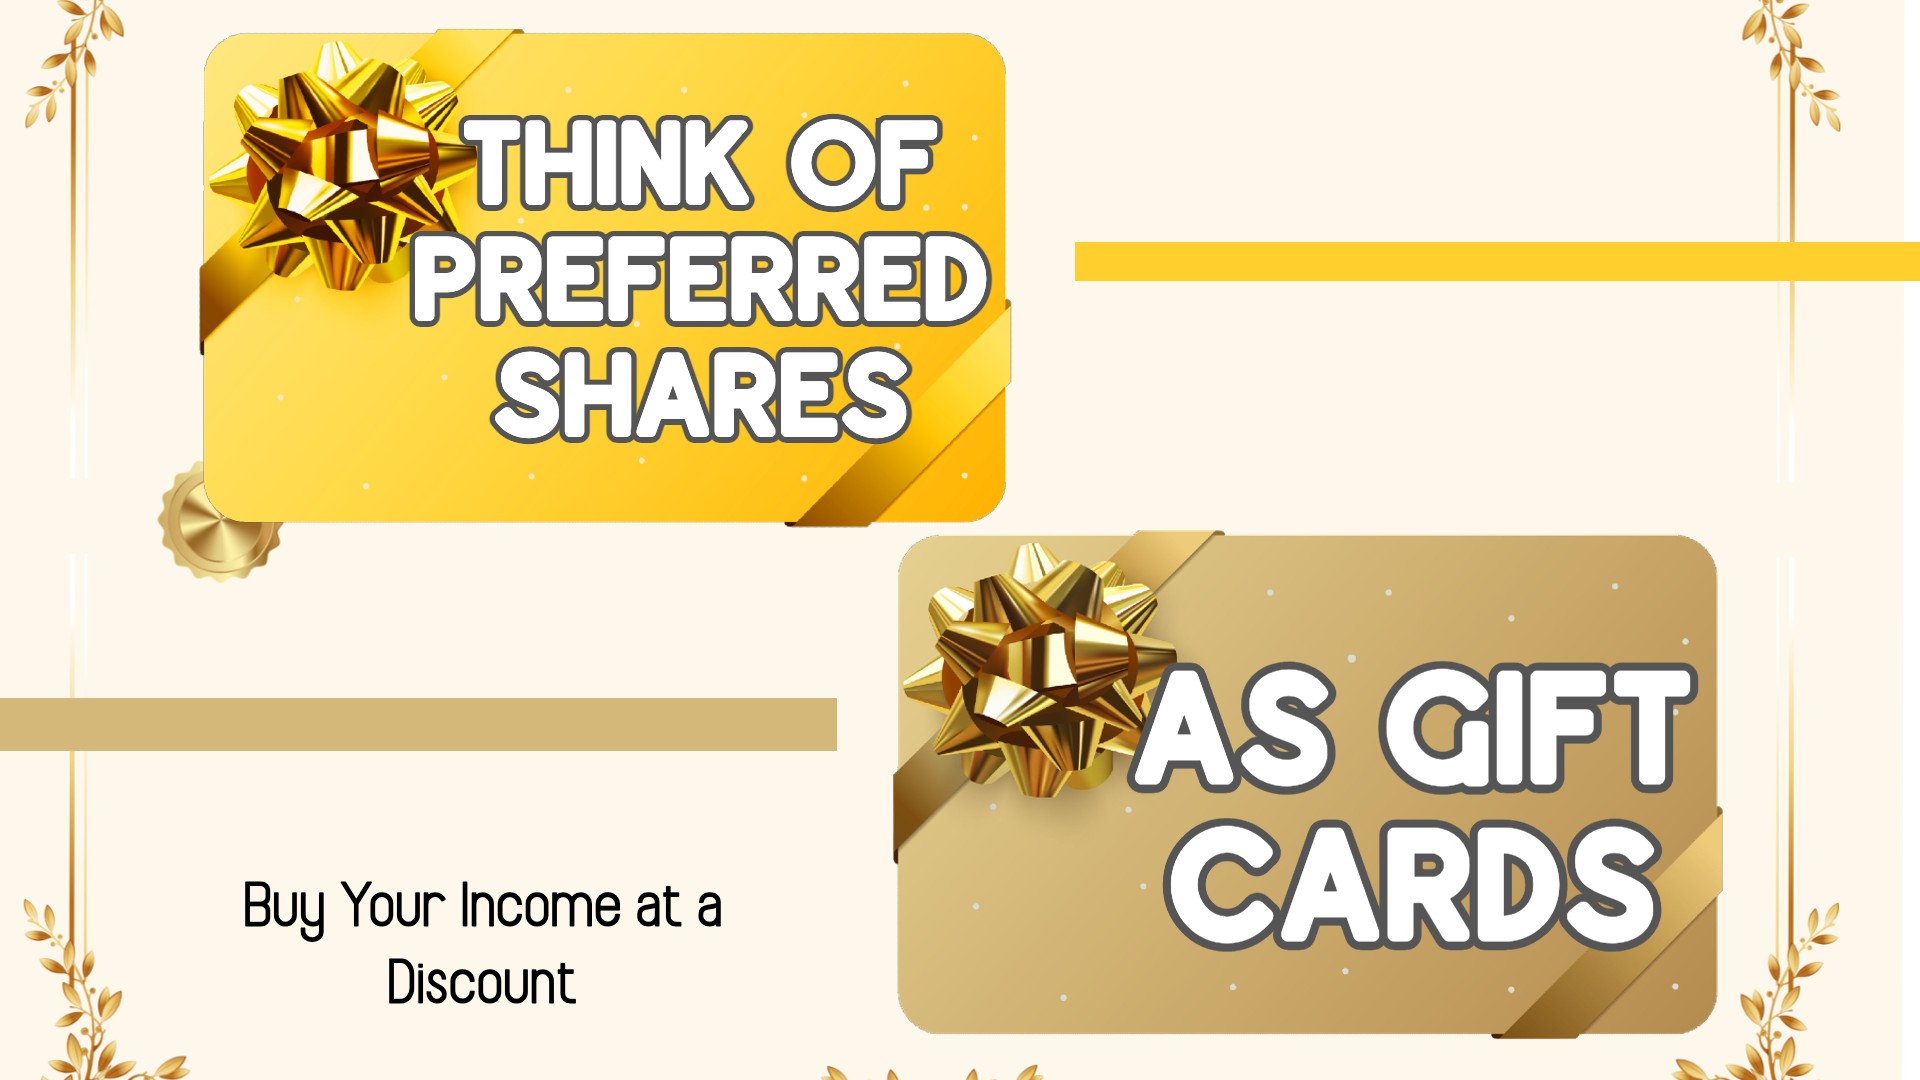 Think of Preferred Shares as Gift Cards: Buy Your Income at a Discount